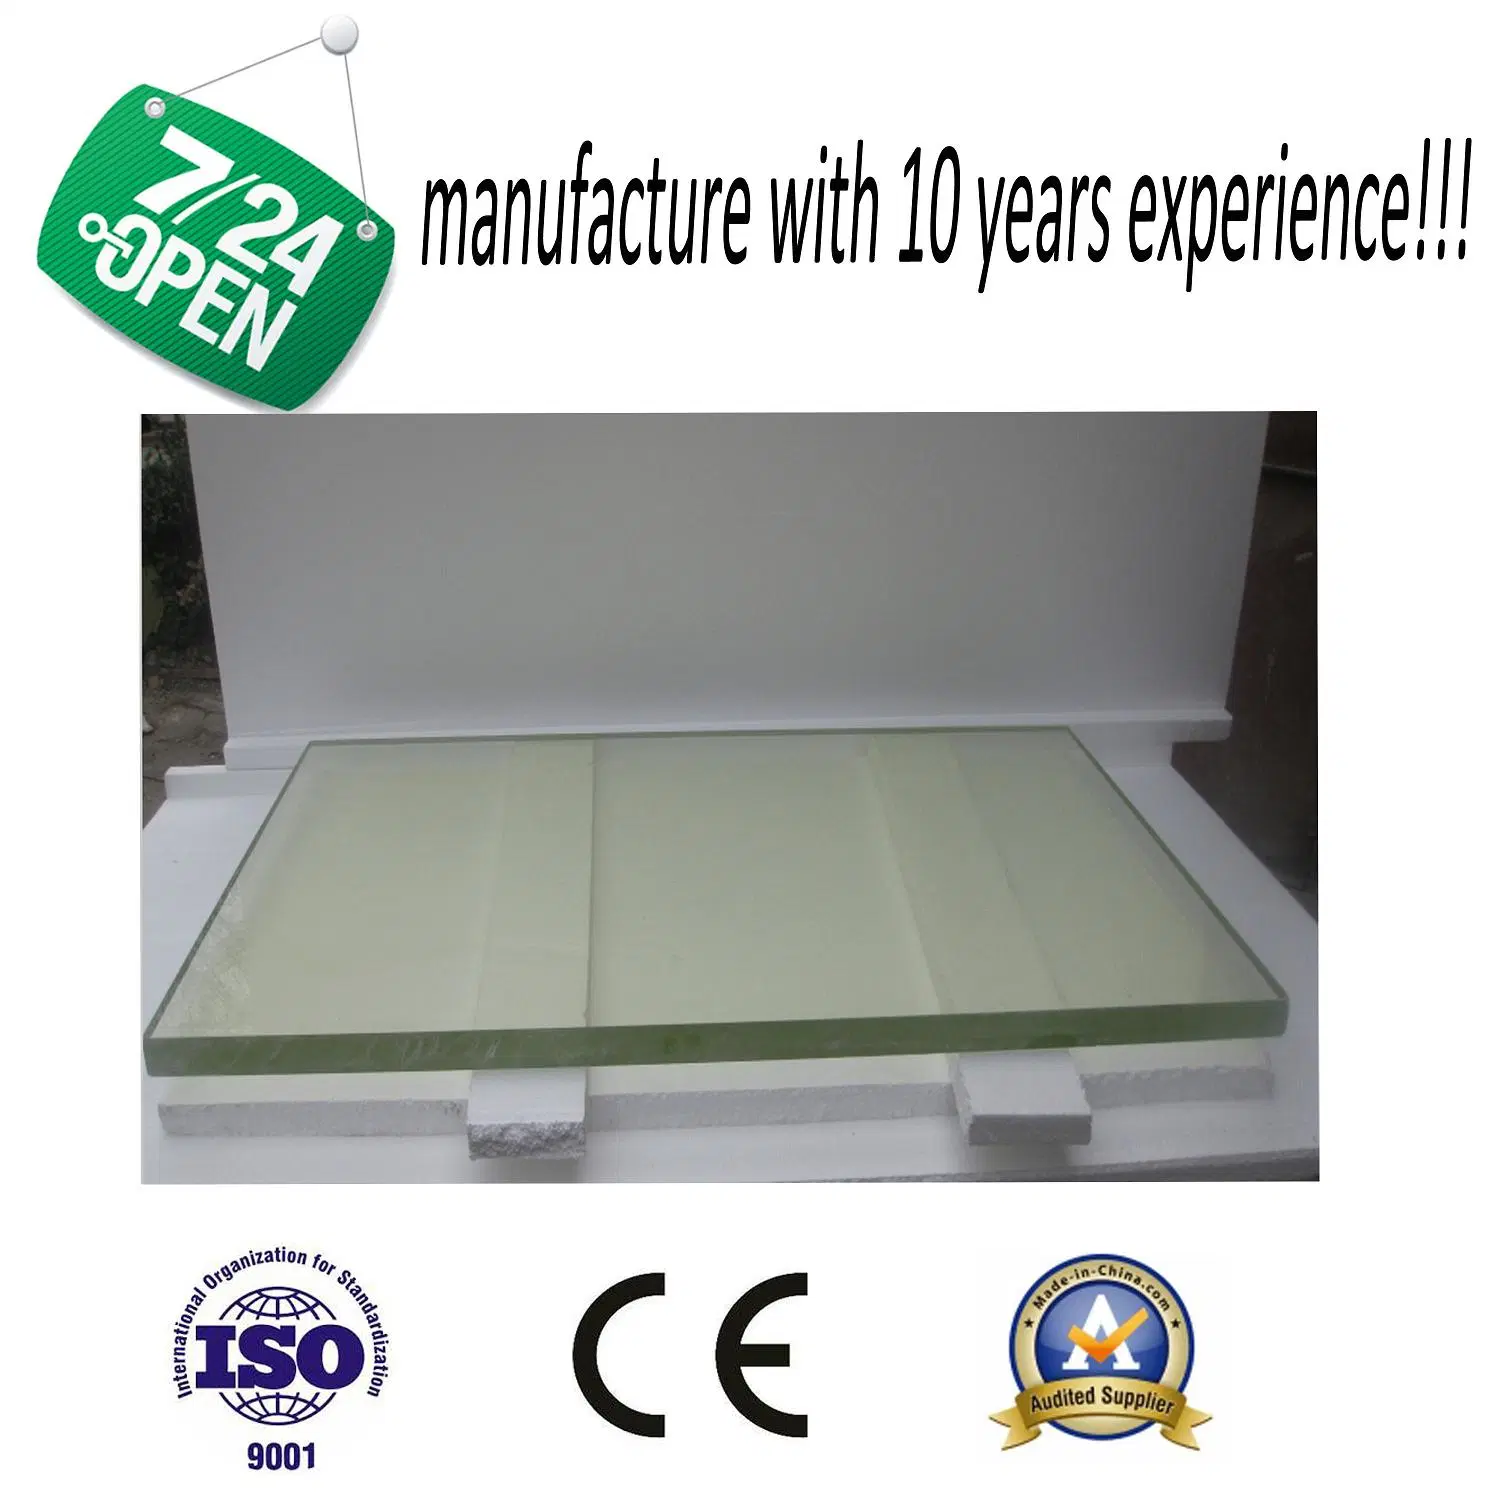 2mmpb High Medical Lead/X Ray Protective /Radiology/Radiation/ Shielding Glass for CT Room Radiation Protection Window